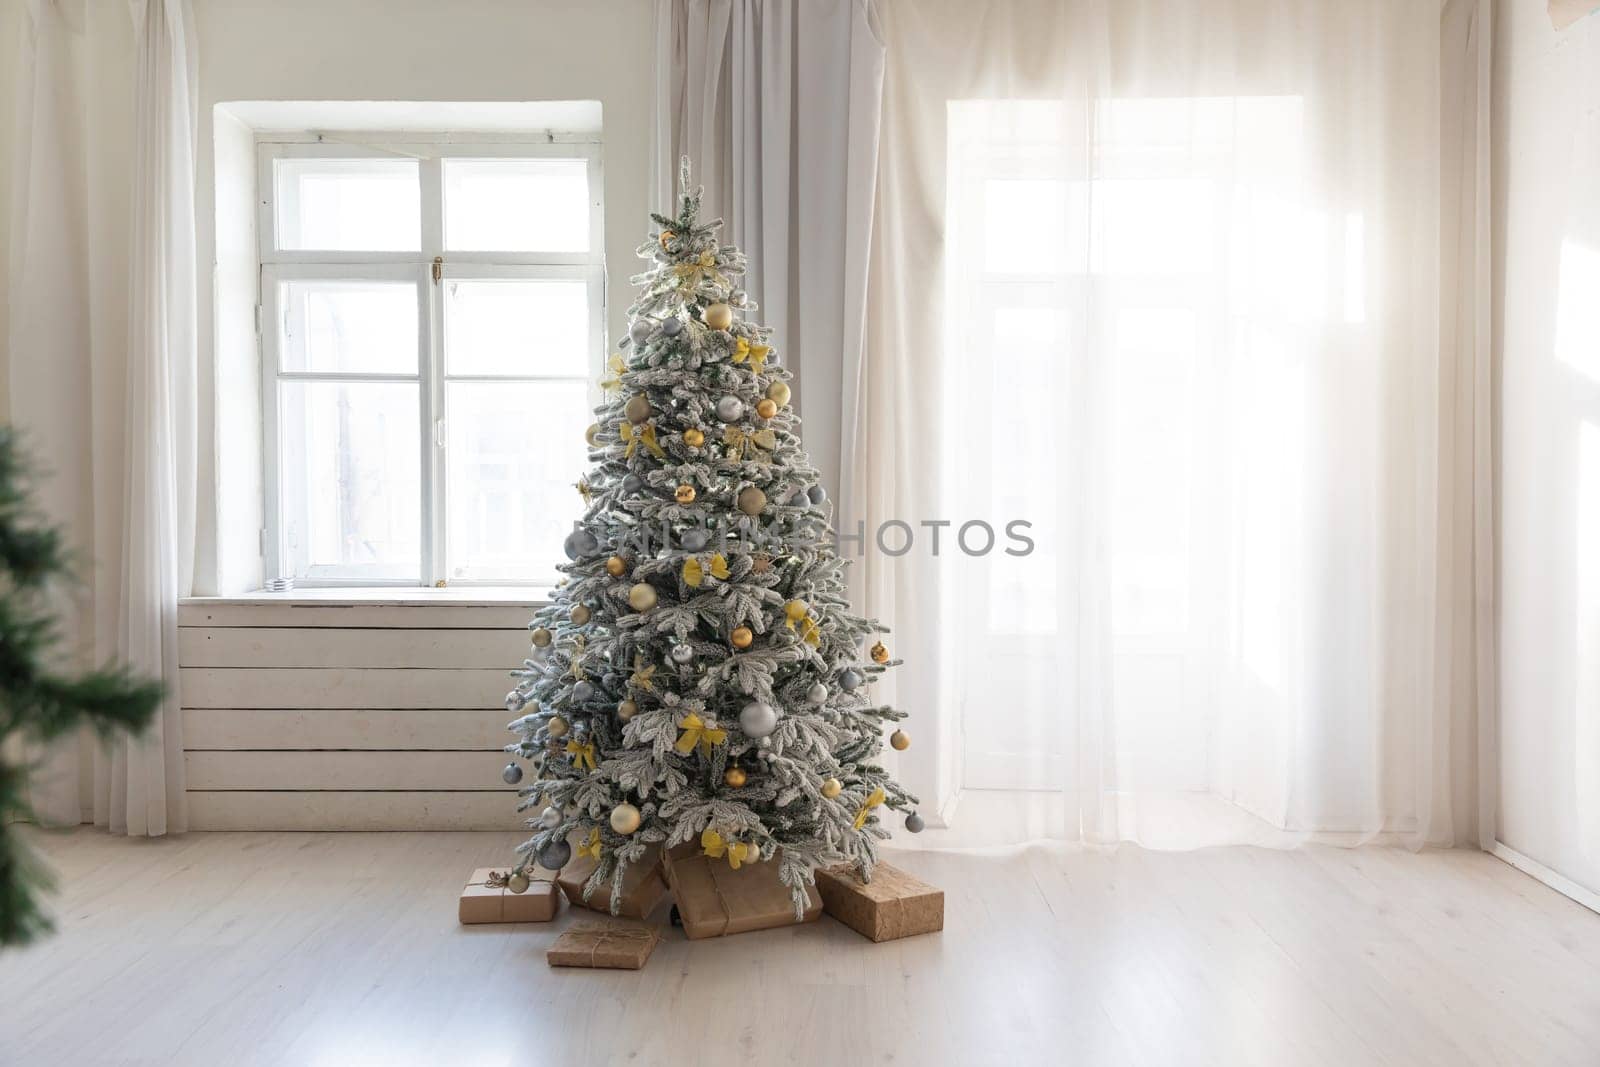 Interior christmas tree with gifts decorations for new year by Simakov